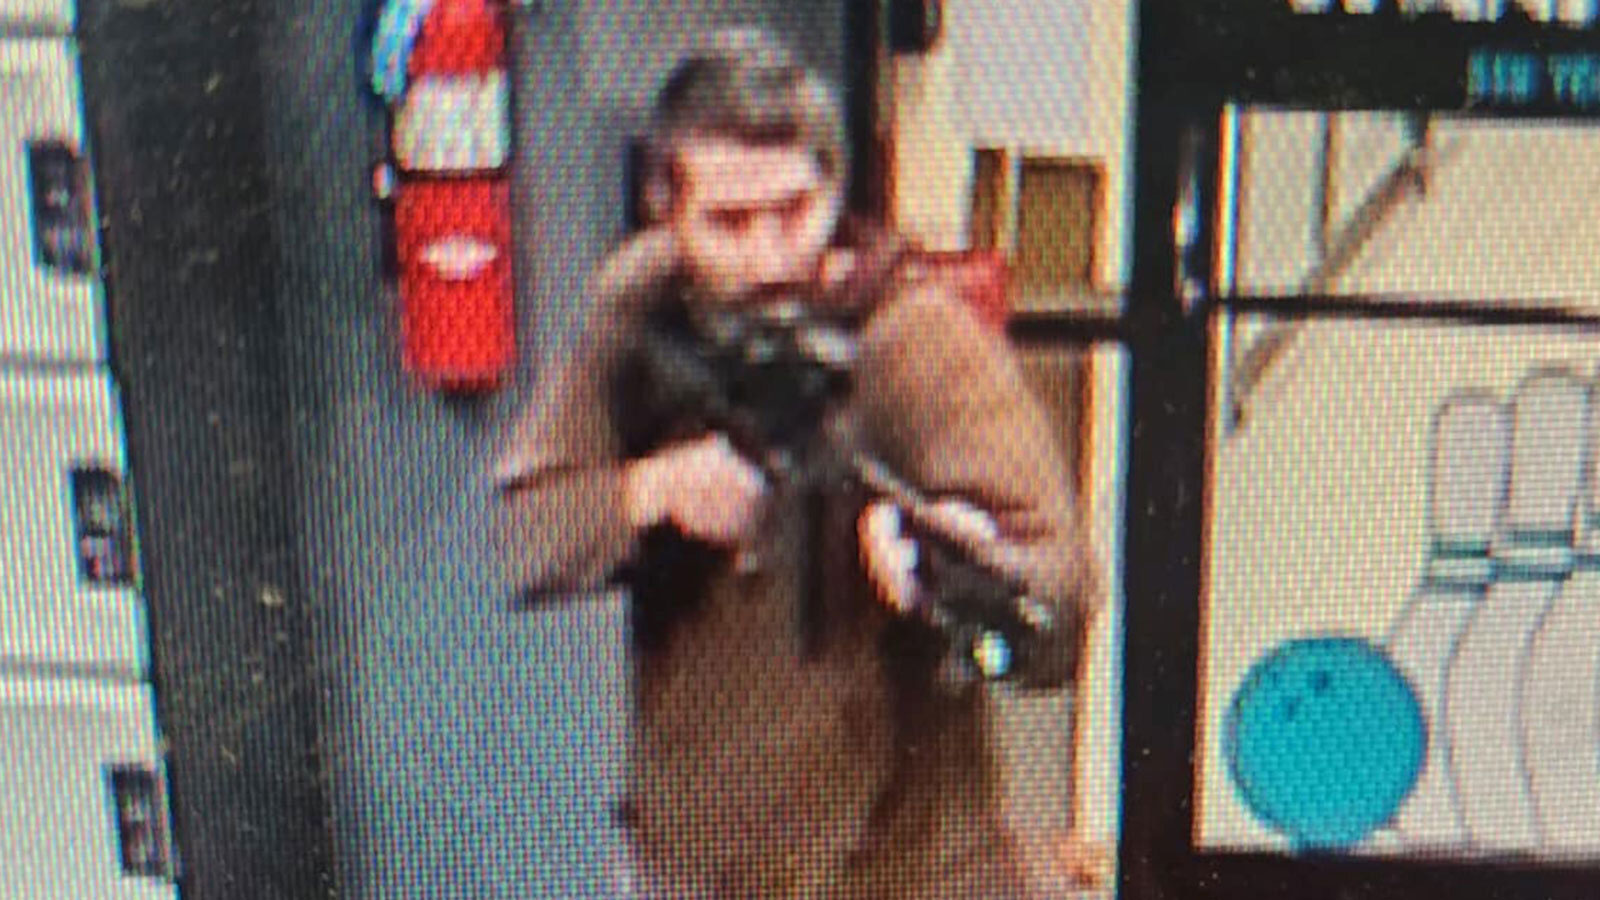 The Androscoggin County Sheriff's Office released an image believed to be the suspect at large. 